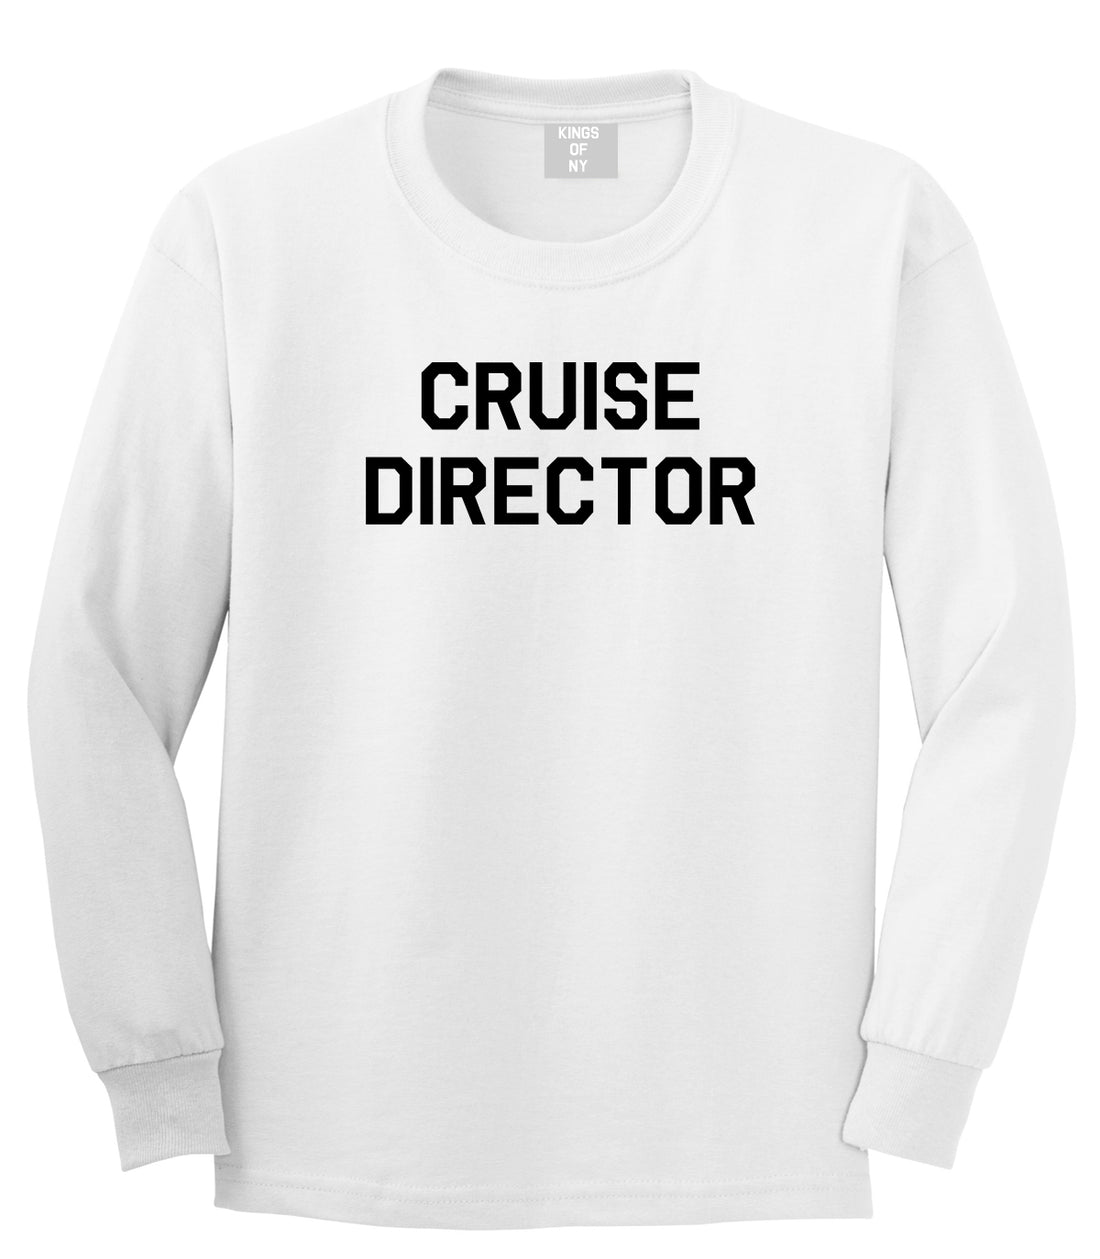 Cruise Director Mens White Long Sleeve T-Shirt by Kings Of NY